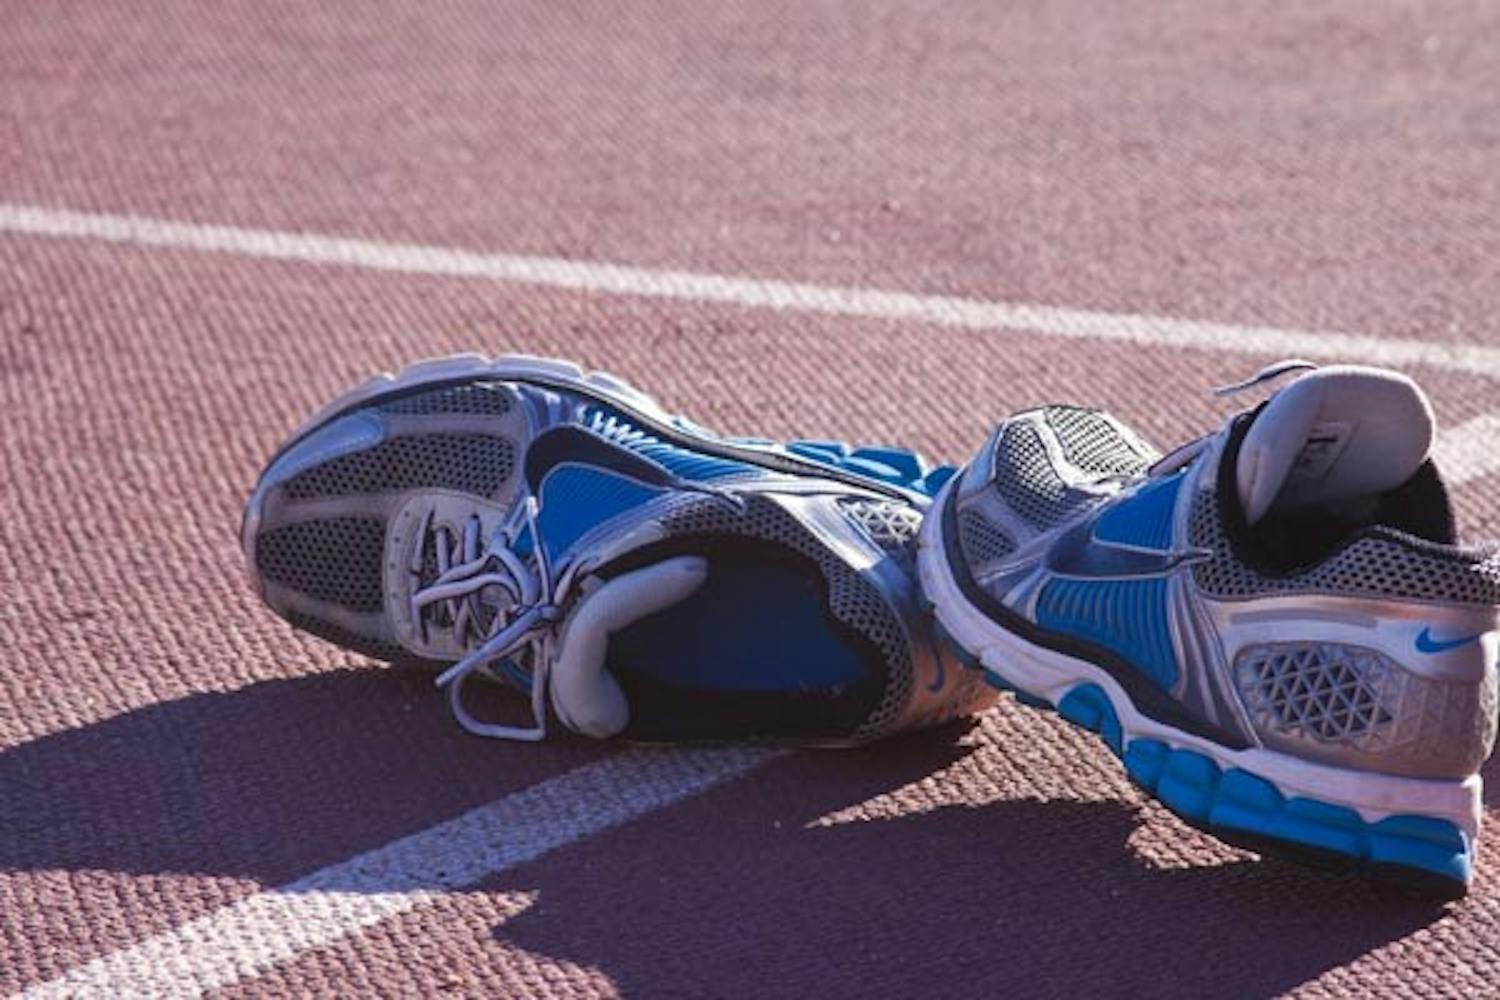 HITTIN' THE TRACK: Running shoes are left on the Sun Angel track after an early morning work-out by the Cross Country team. (Photo by Annie Wechter)